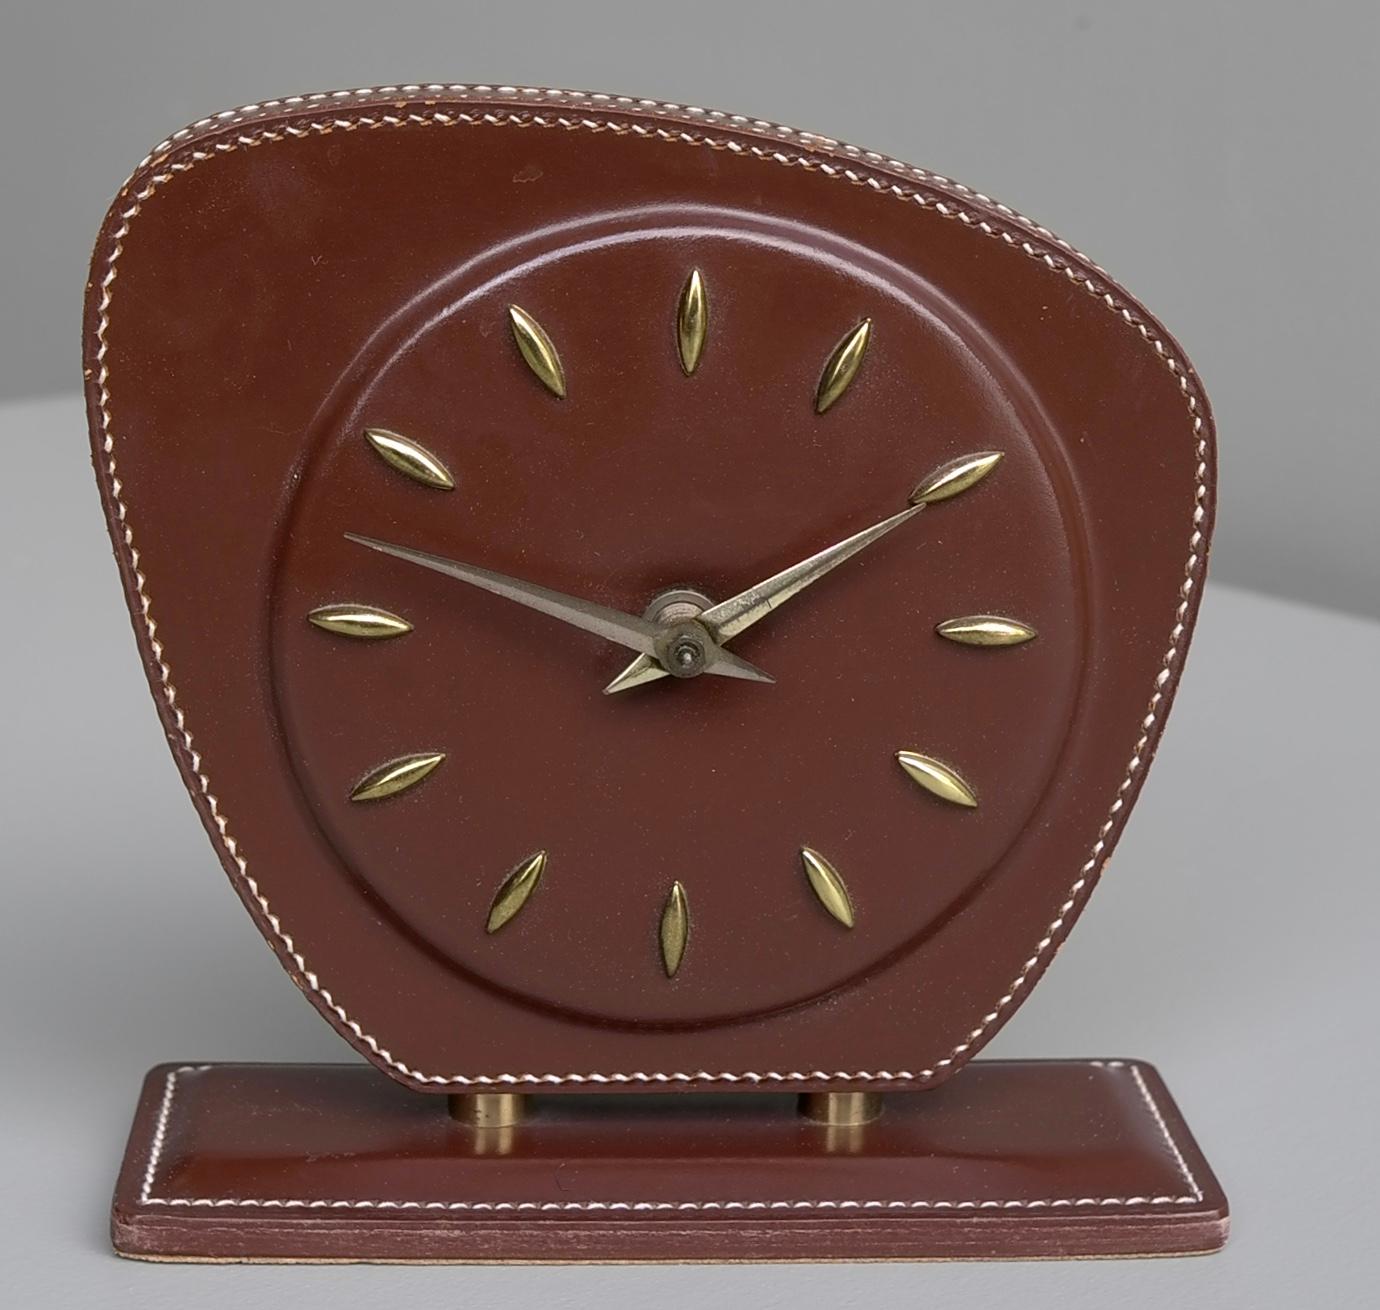 French handstitched brown leather clock, Jacques Adnet attributed, 1950s.